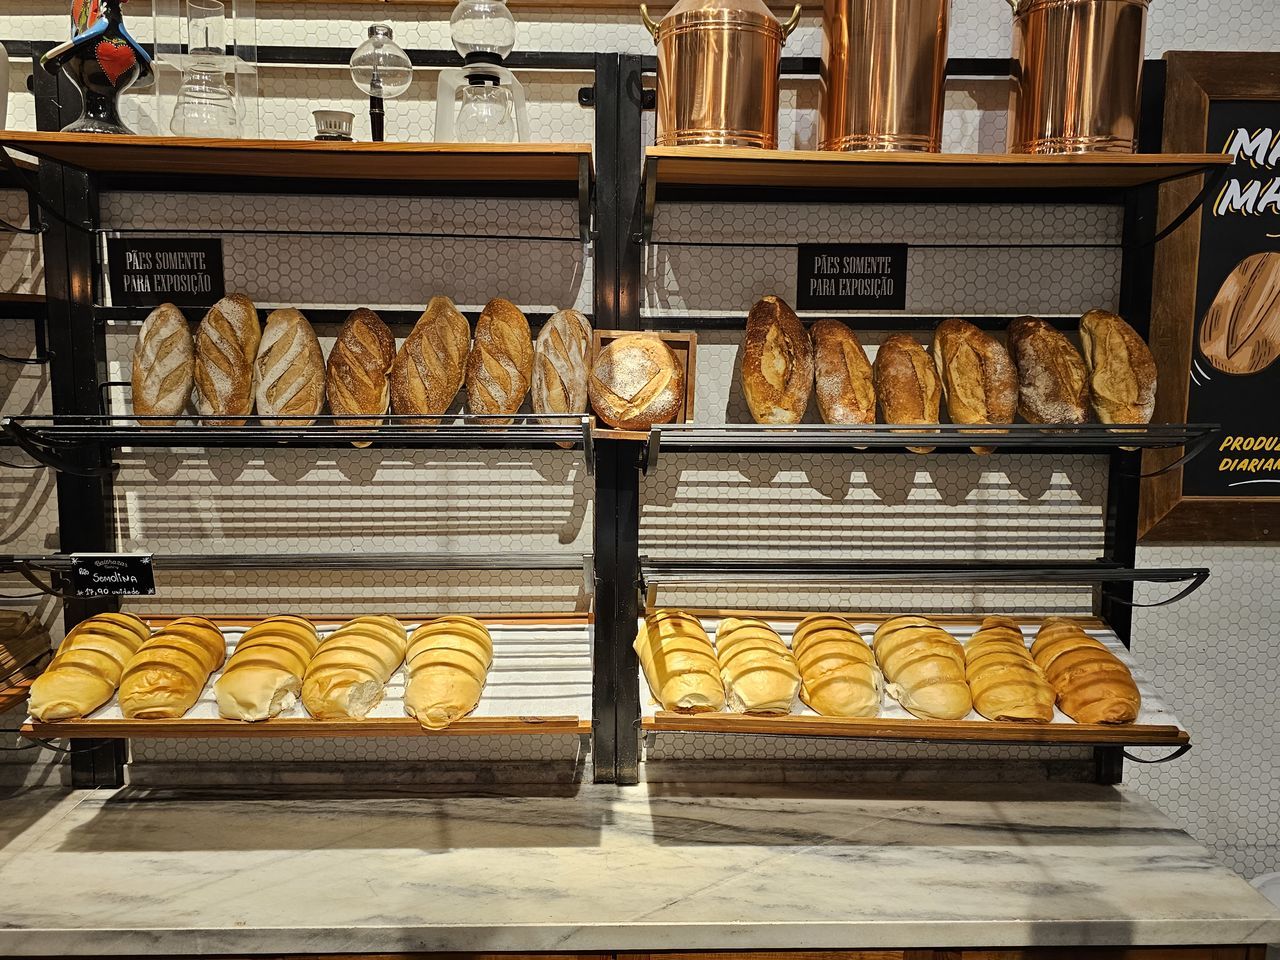 bakery, food and drink, food, store, shelf, baker, baked, bread, retail, indoors, freshness, business, no people, fast food, variation, business finance and industry, pâtisserie, meal, in a row, french food, large group of objects, abundance, small business, arrangement, loaf of bread